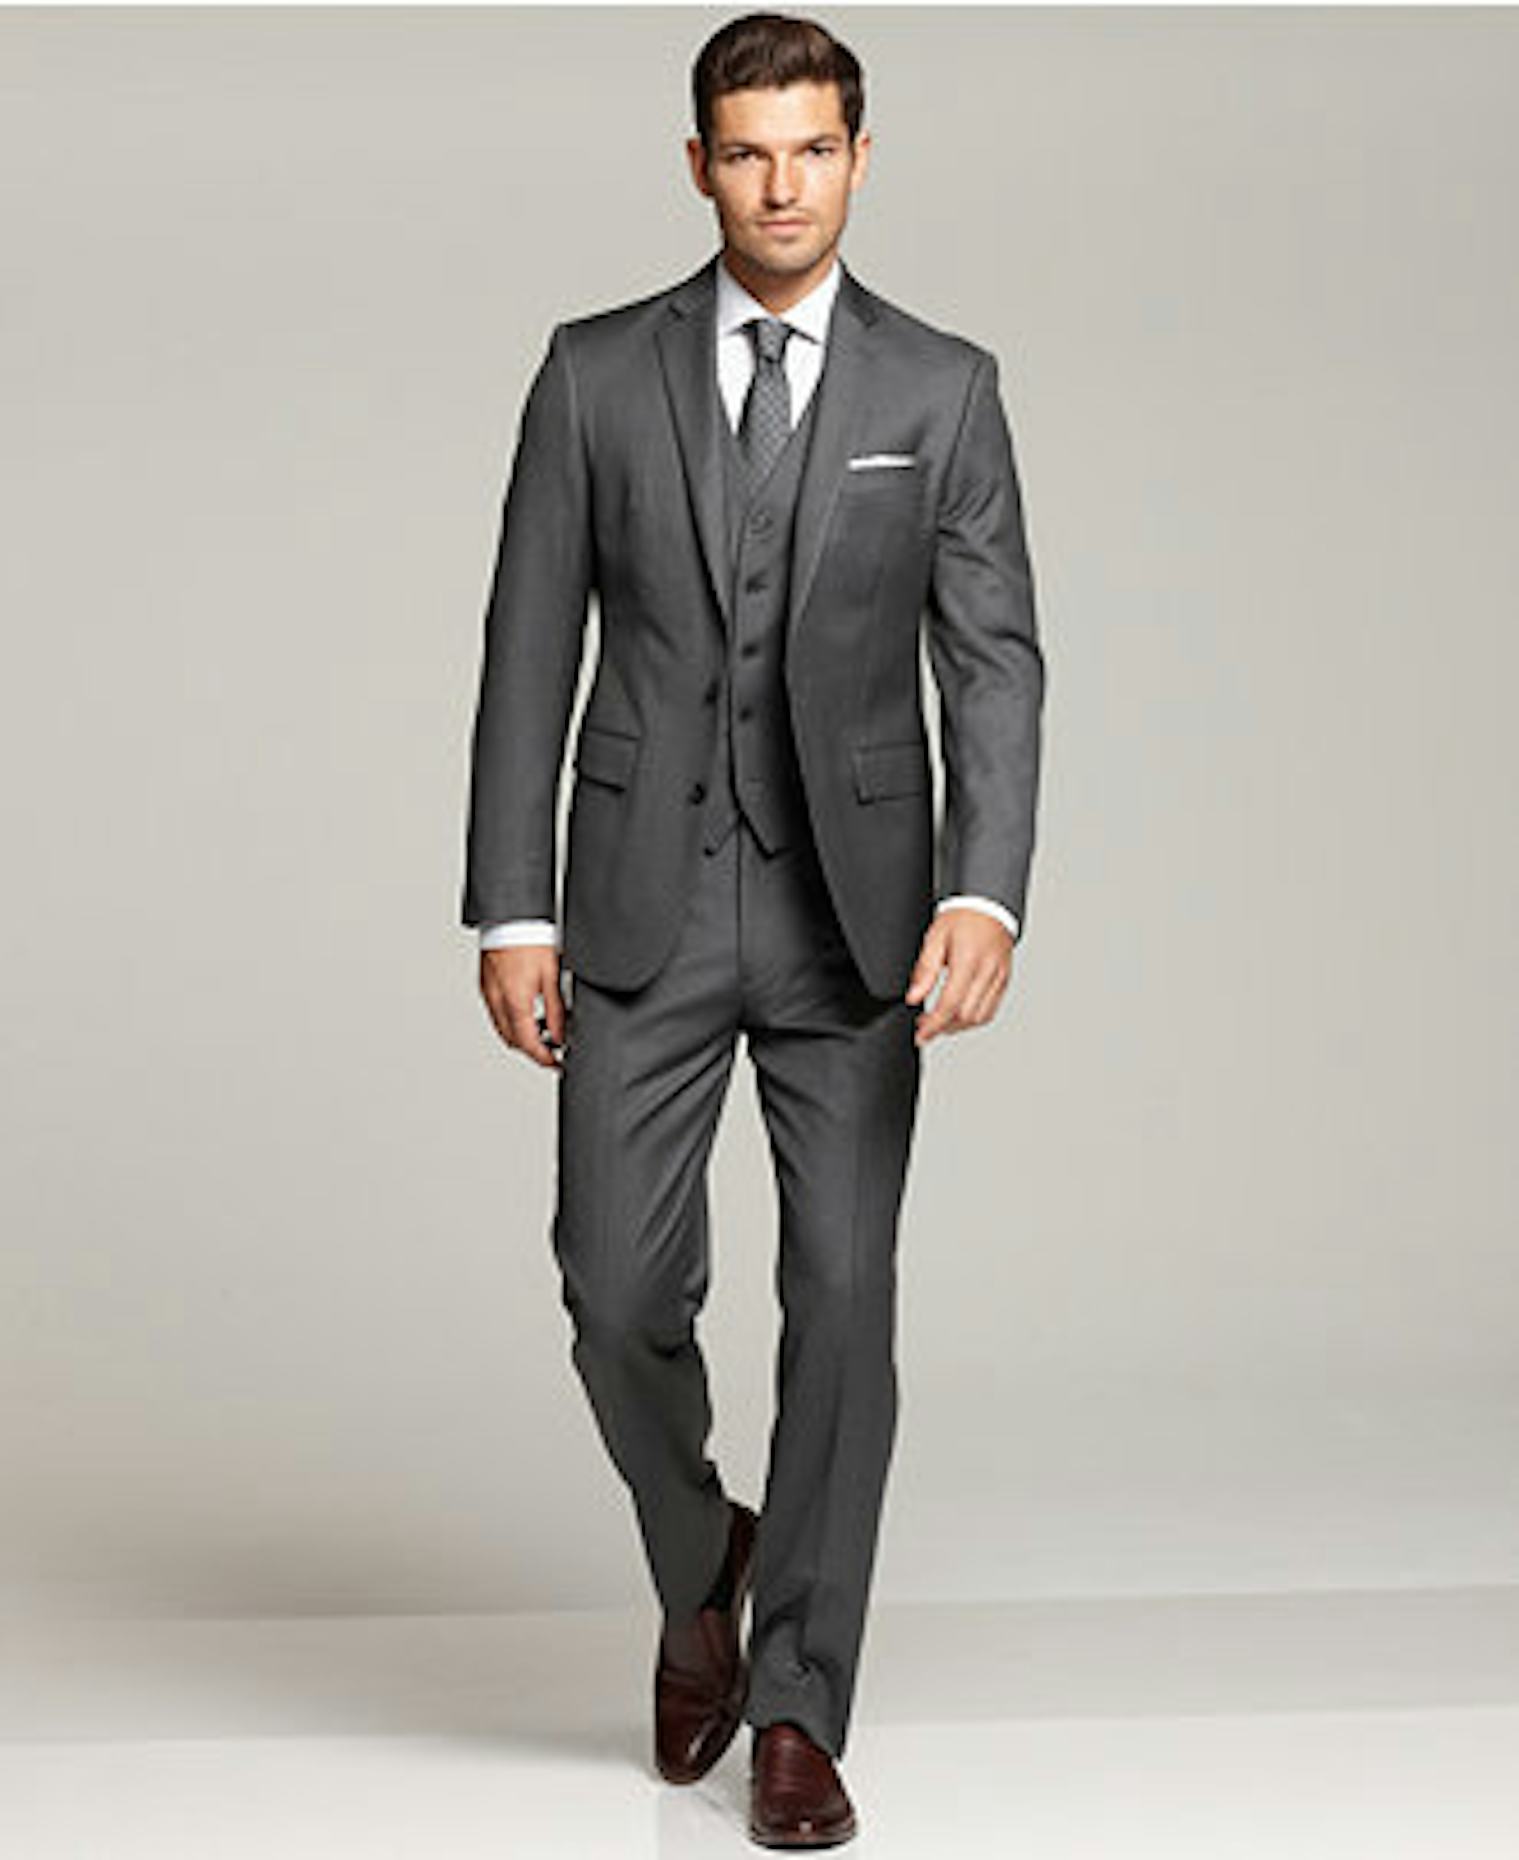 Where To Buy Ryan Seacrest Distinction Suits For Your Own Red Carpet ...